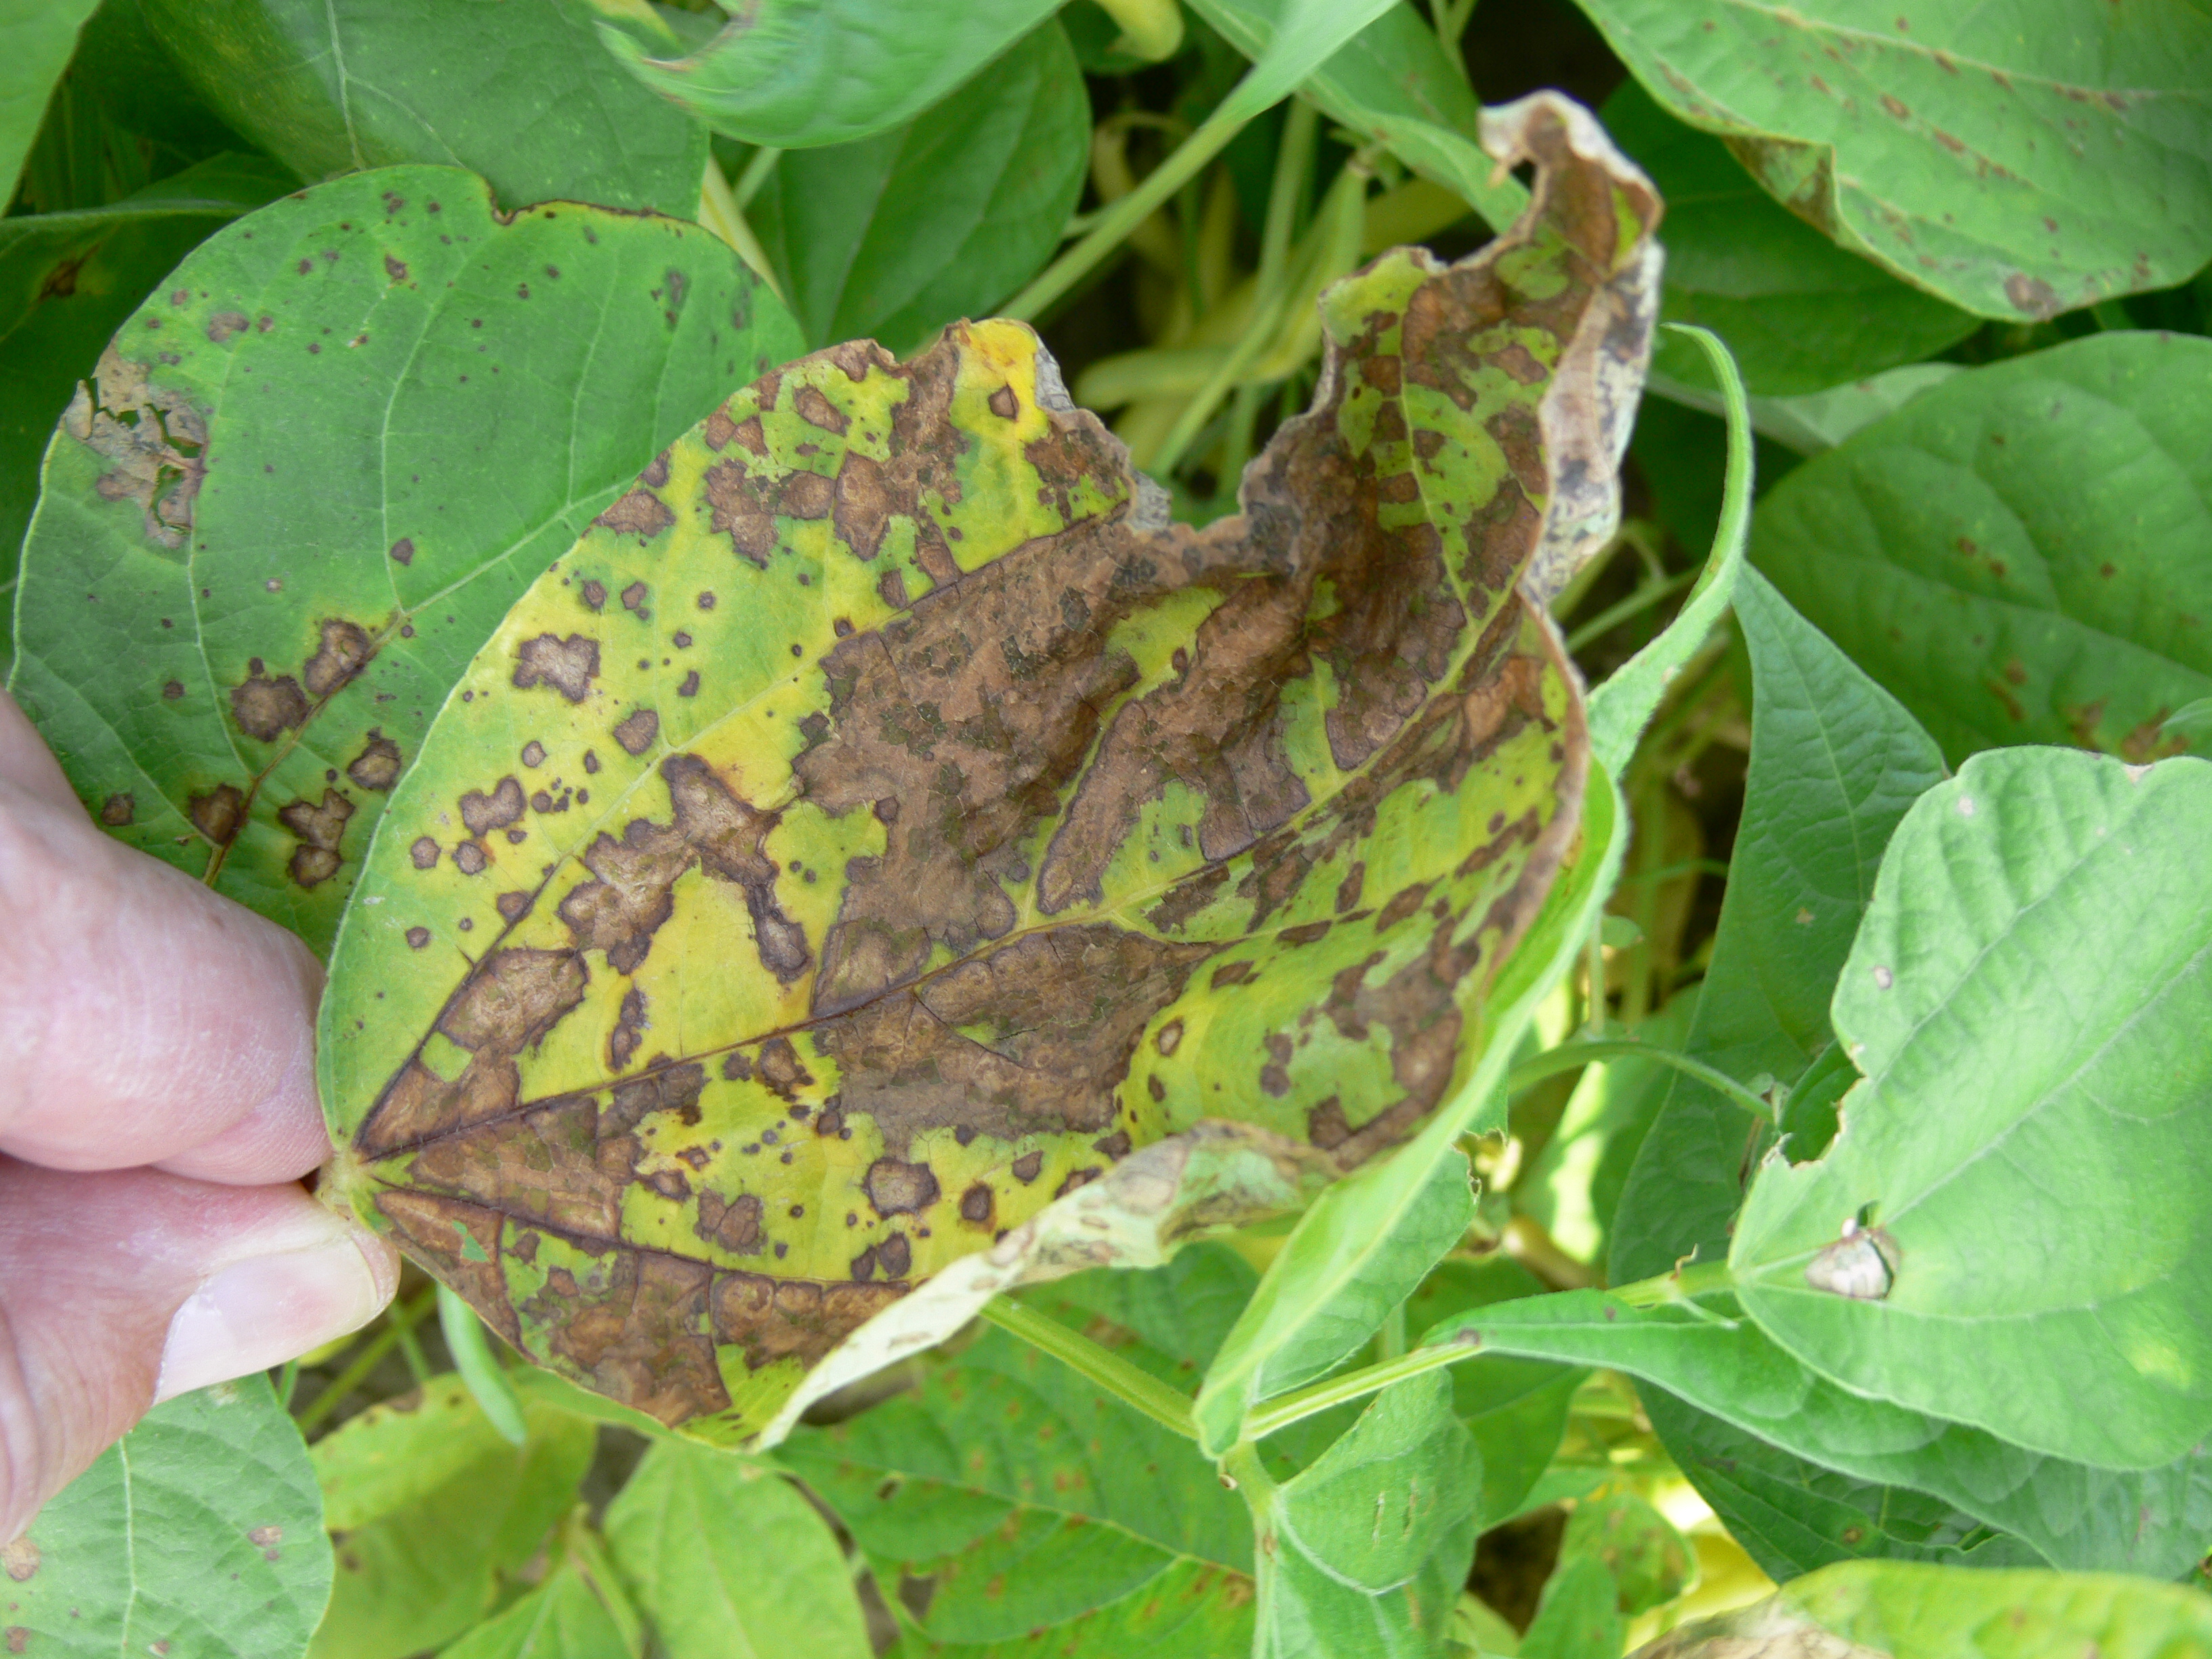 Bacterial brown spot on snap beans